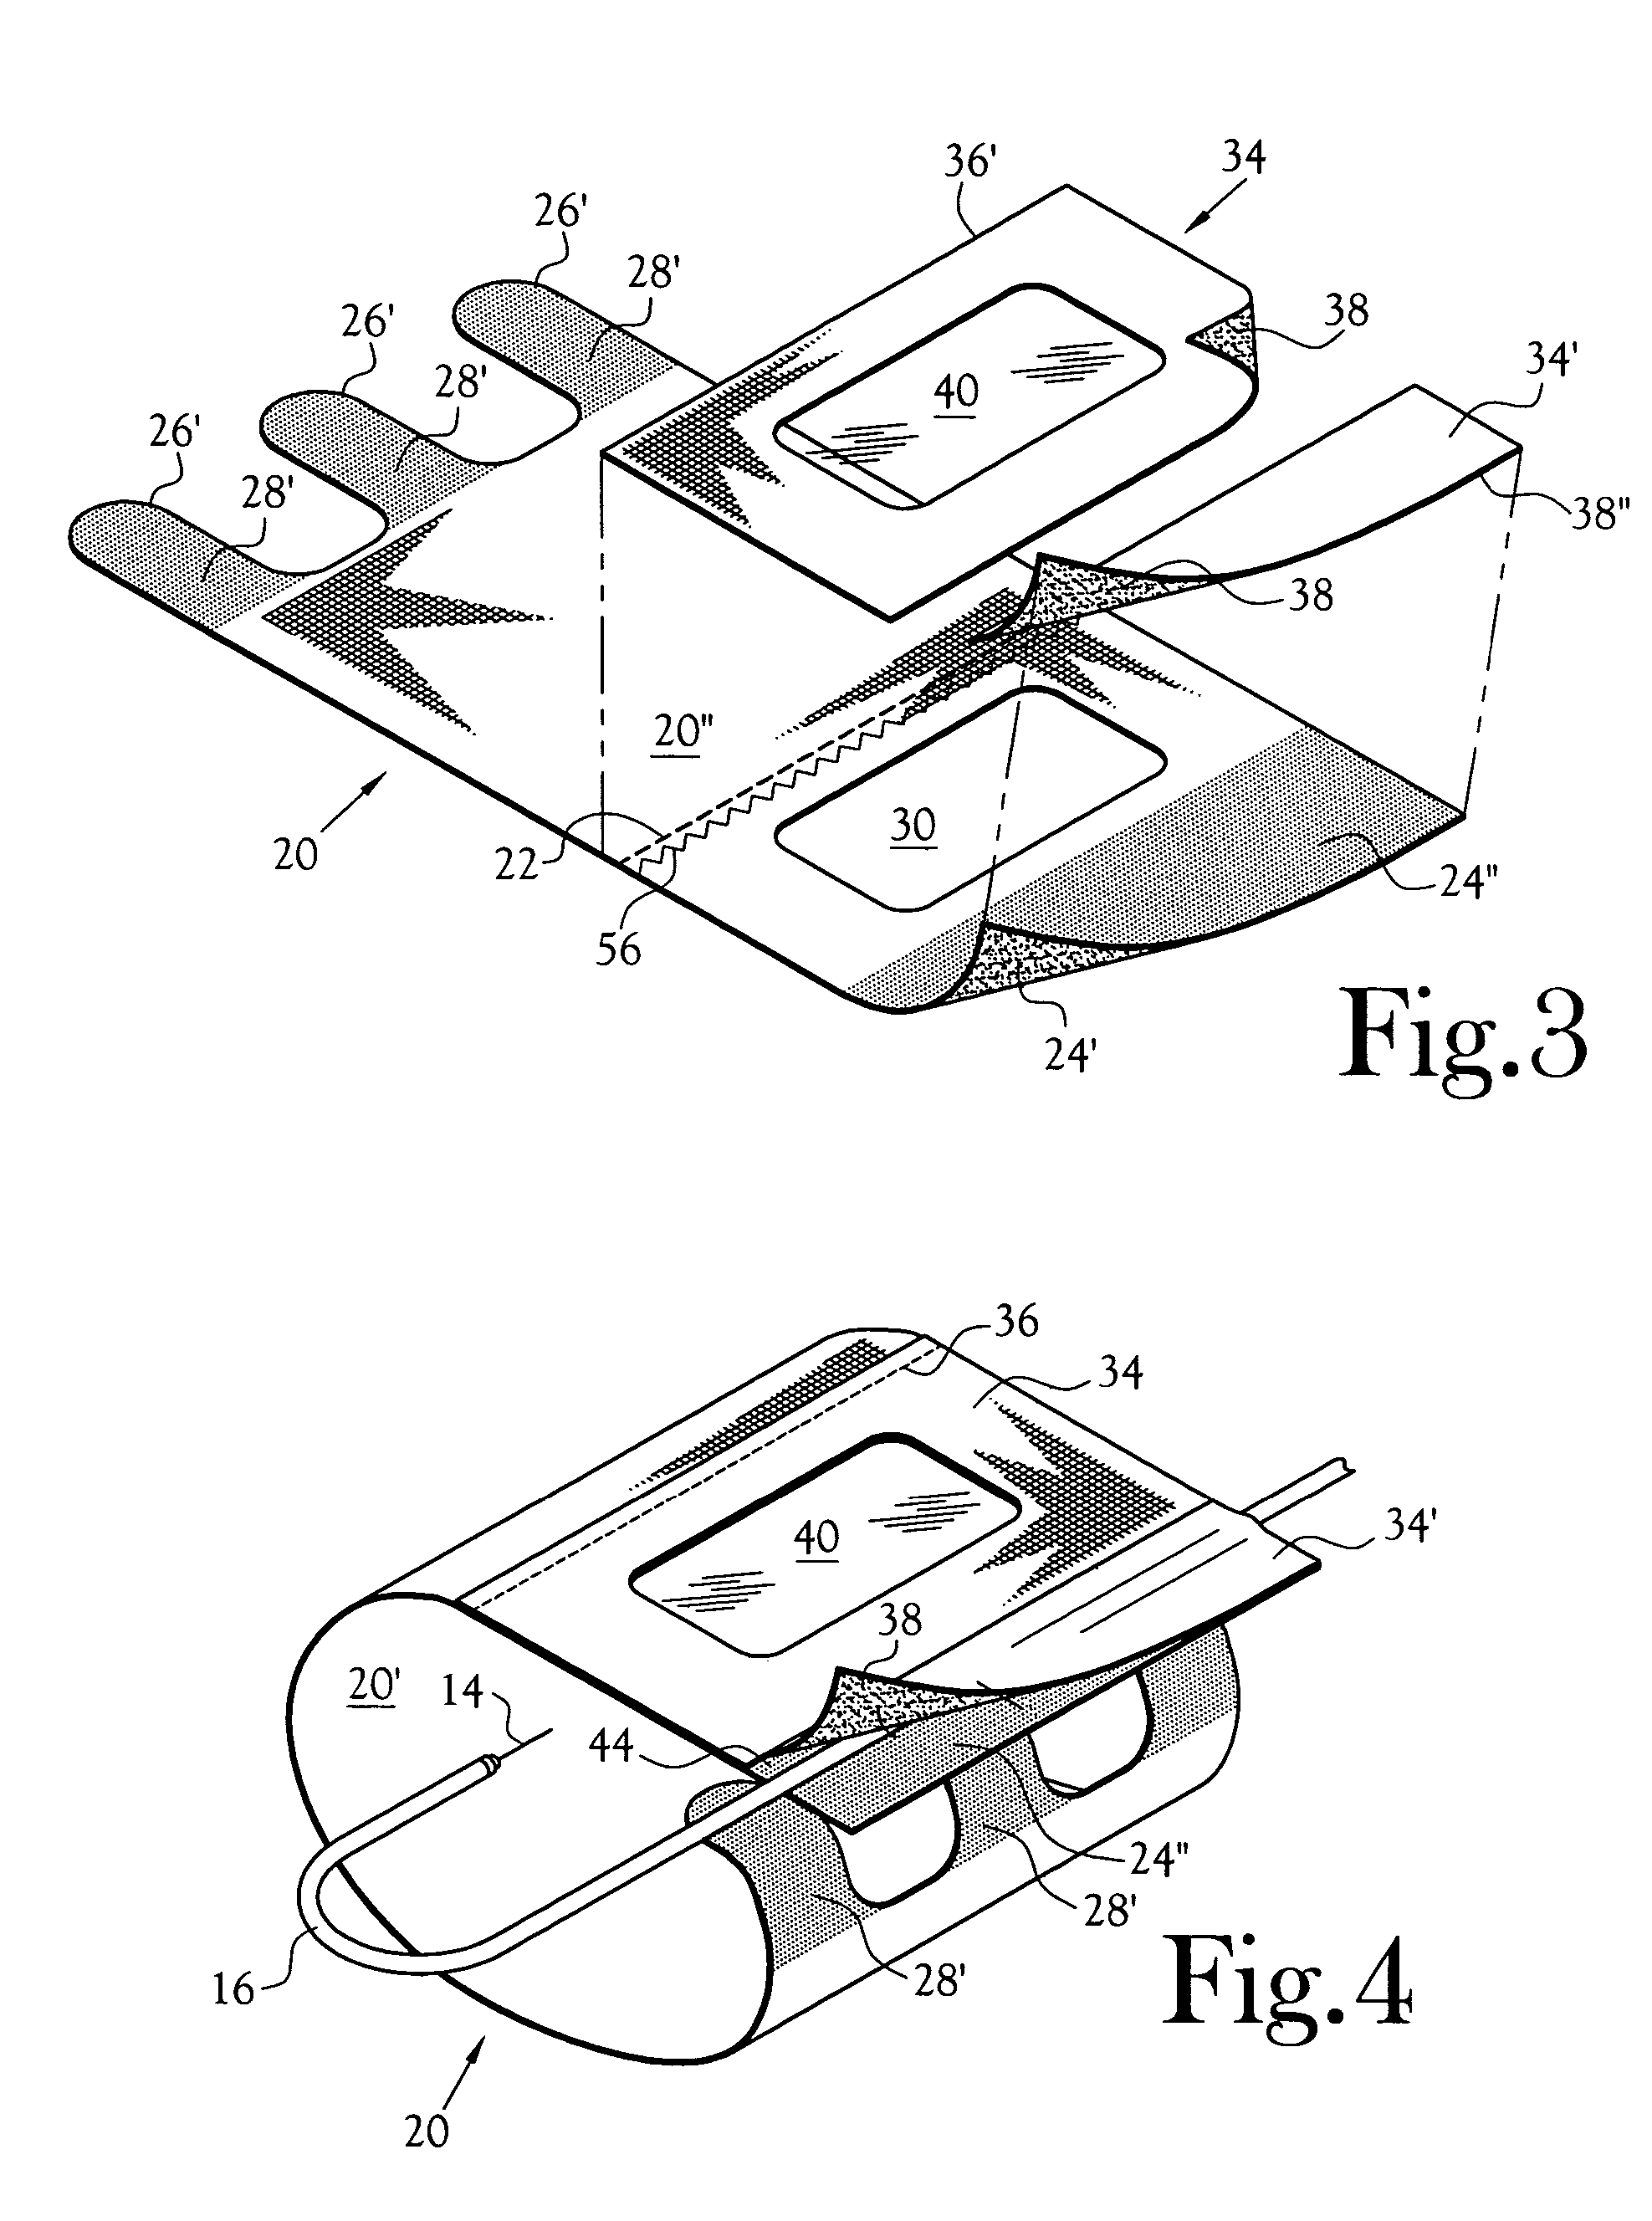 Intravascular infusion site anti-tamper guard having means for site inspection